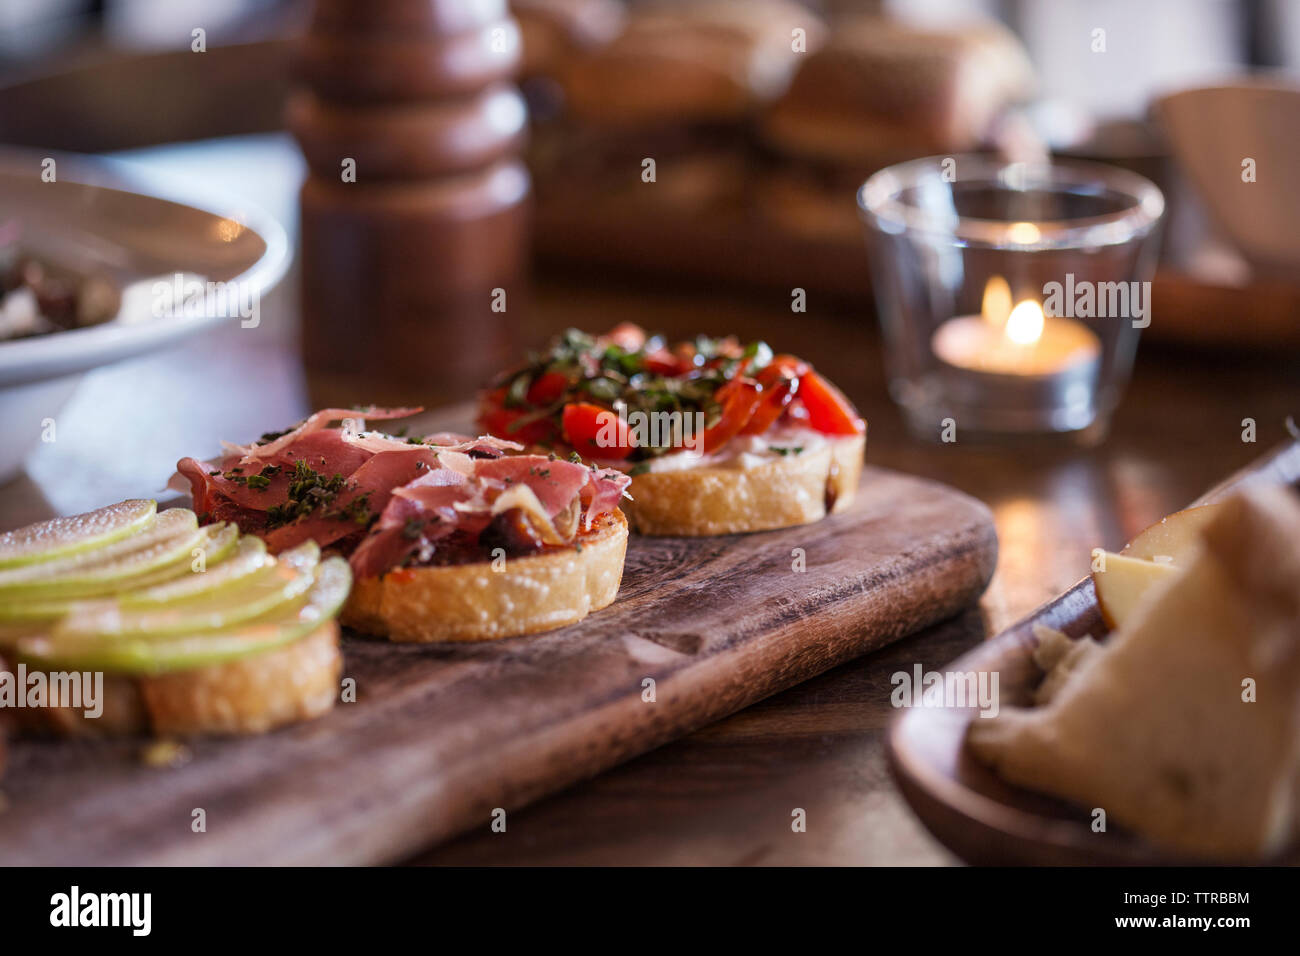 Close-up of bruschettas served on table Stock Photo